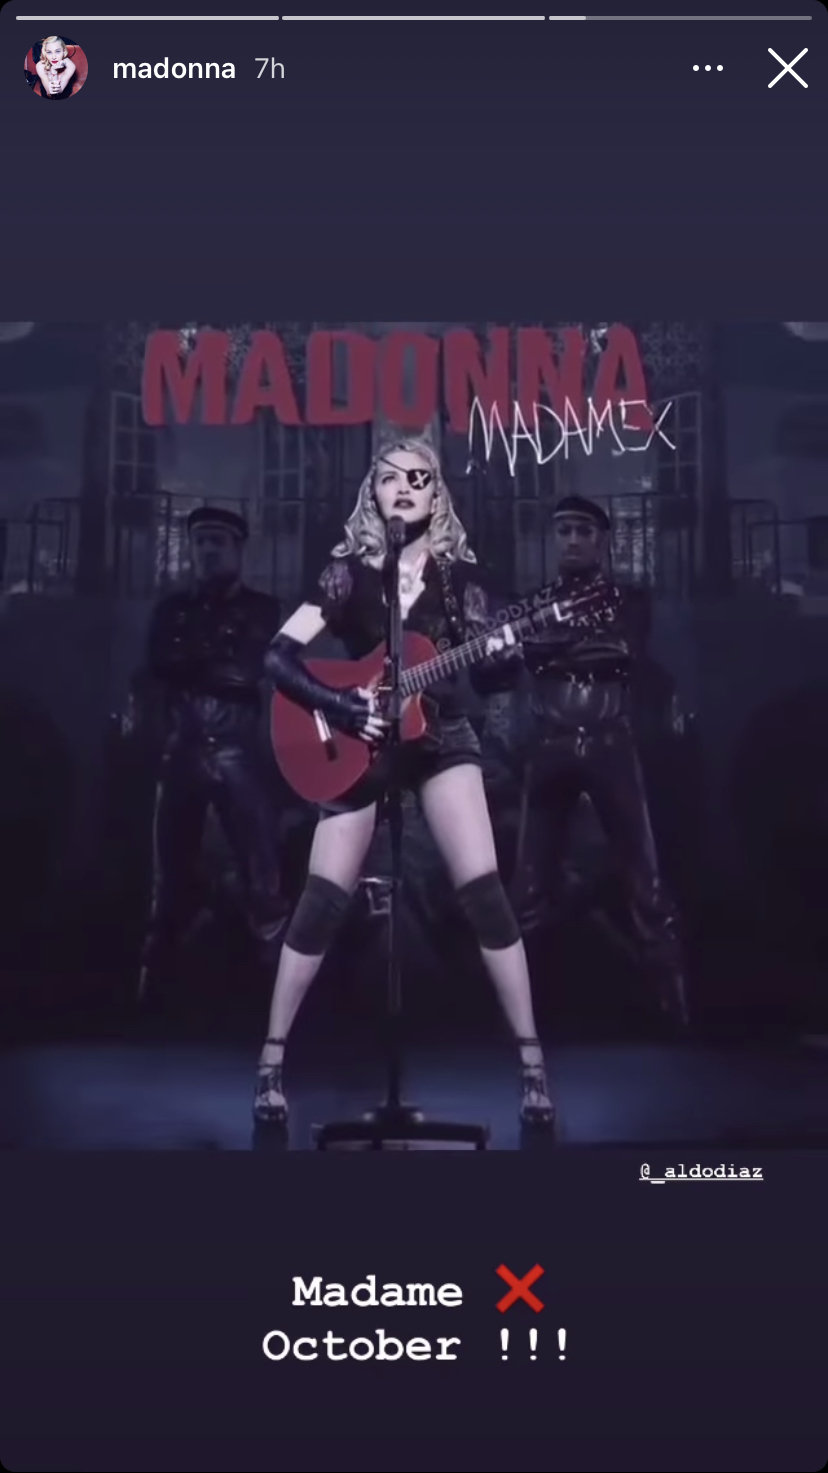 Madonna announces October release for Madame X